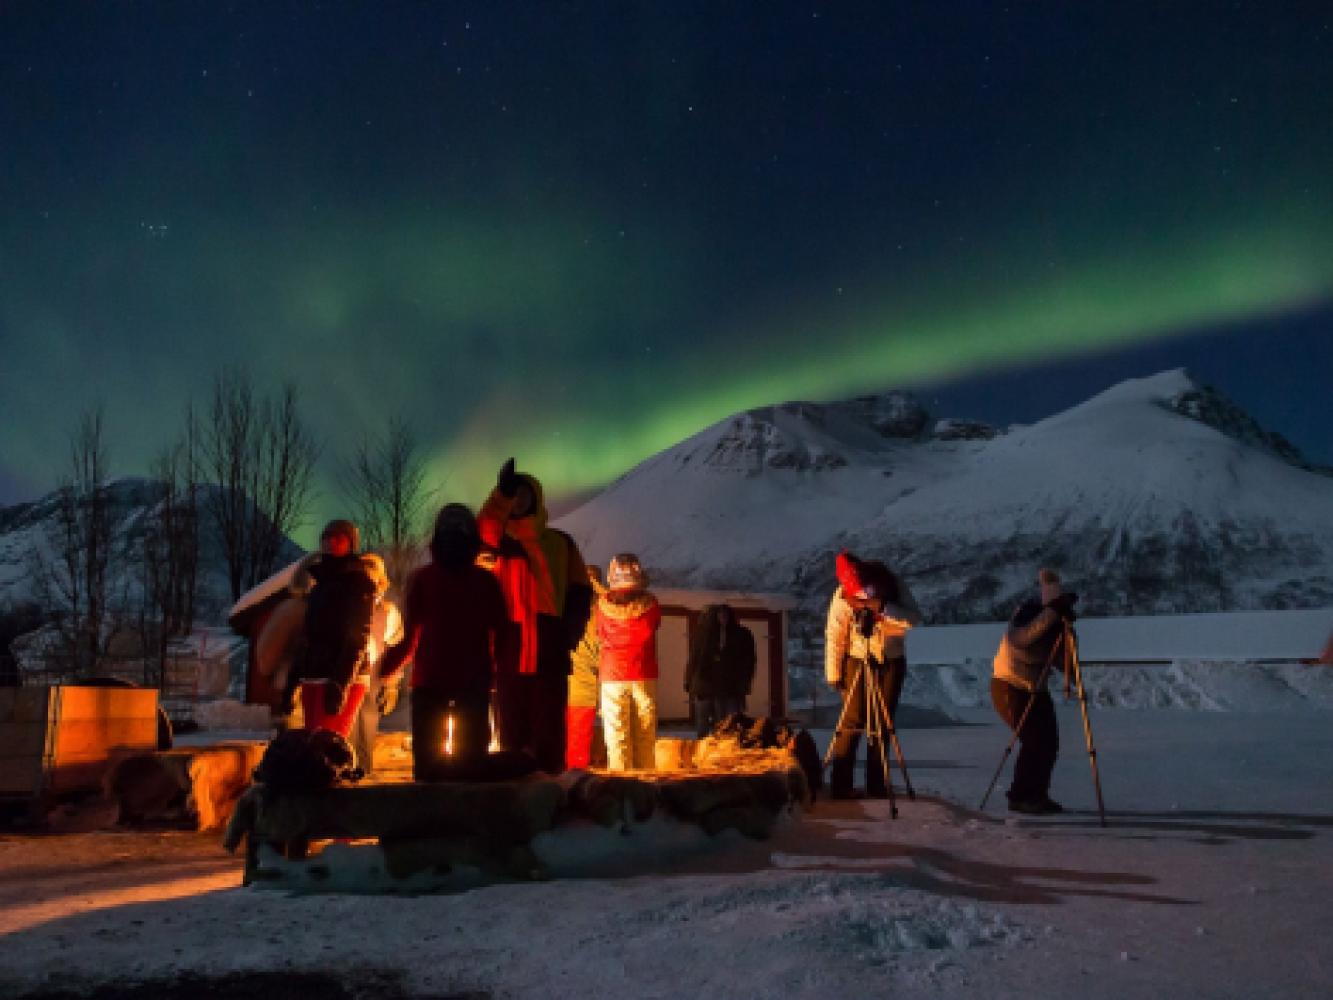 Northern lights camp with Best Arctic outside of Tromsø